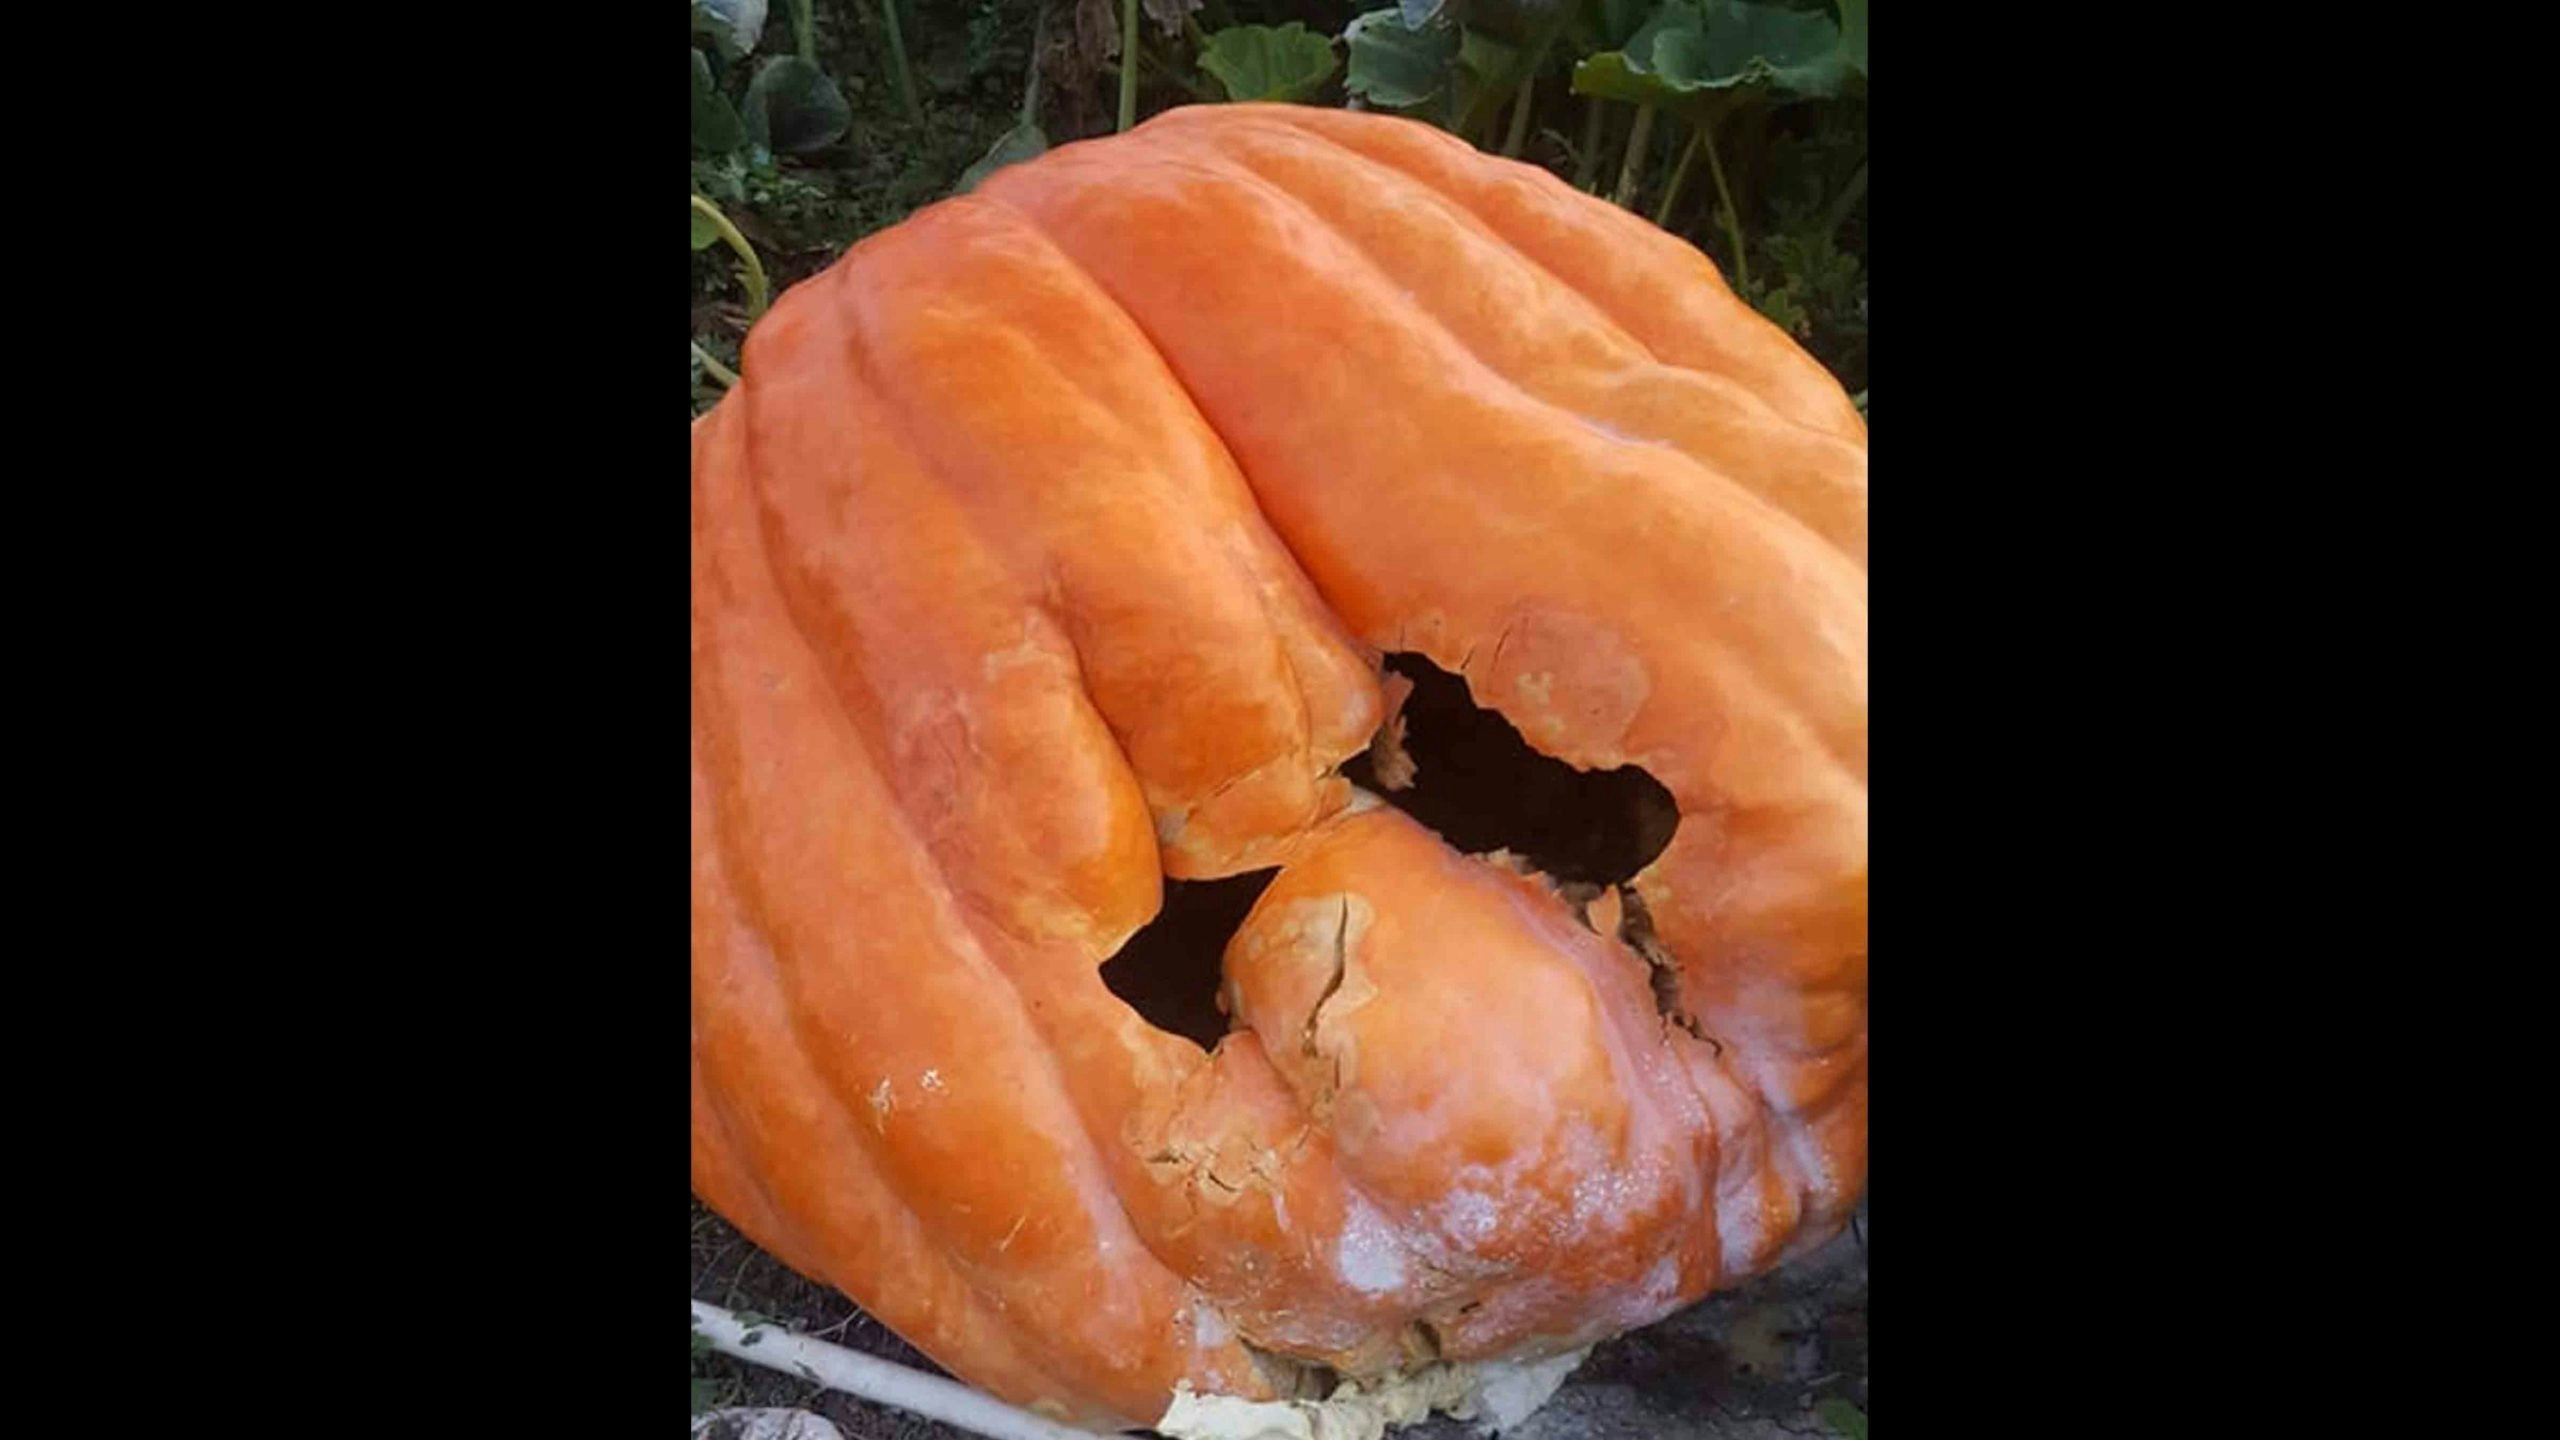 Giant cracked pumpkin scaled